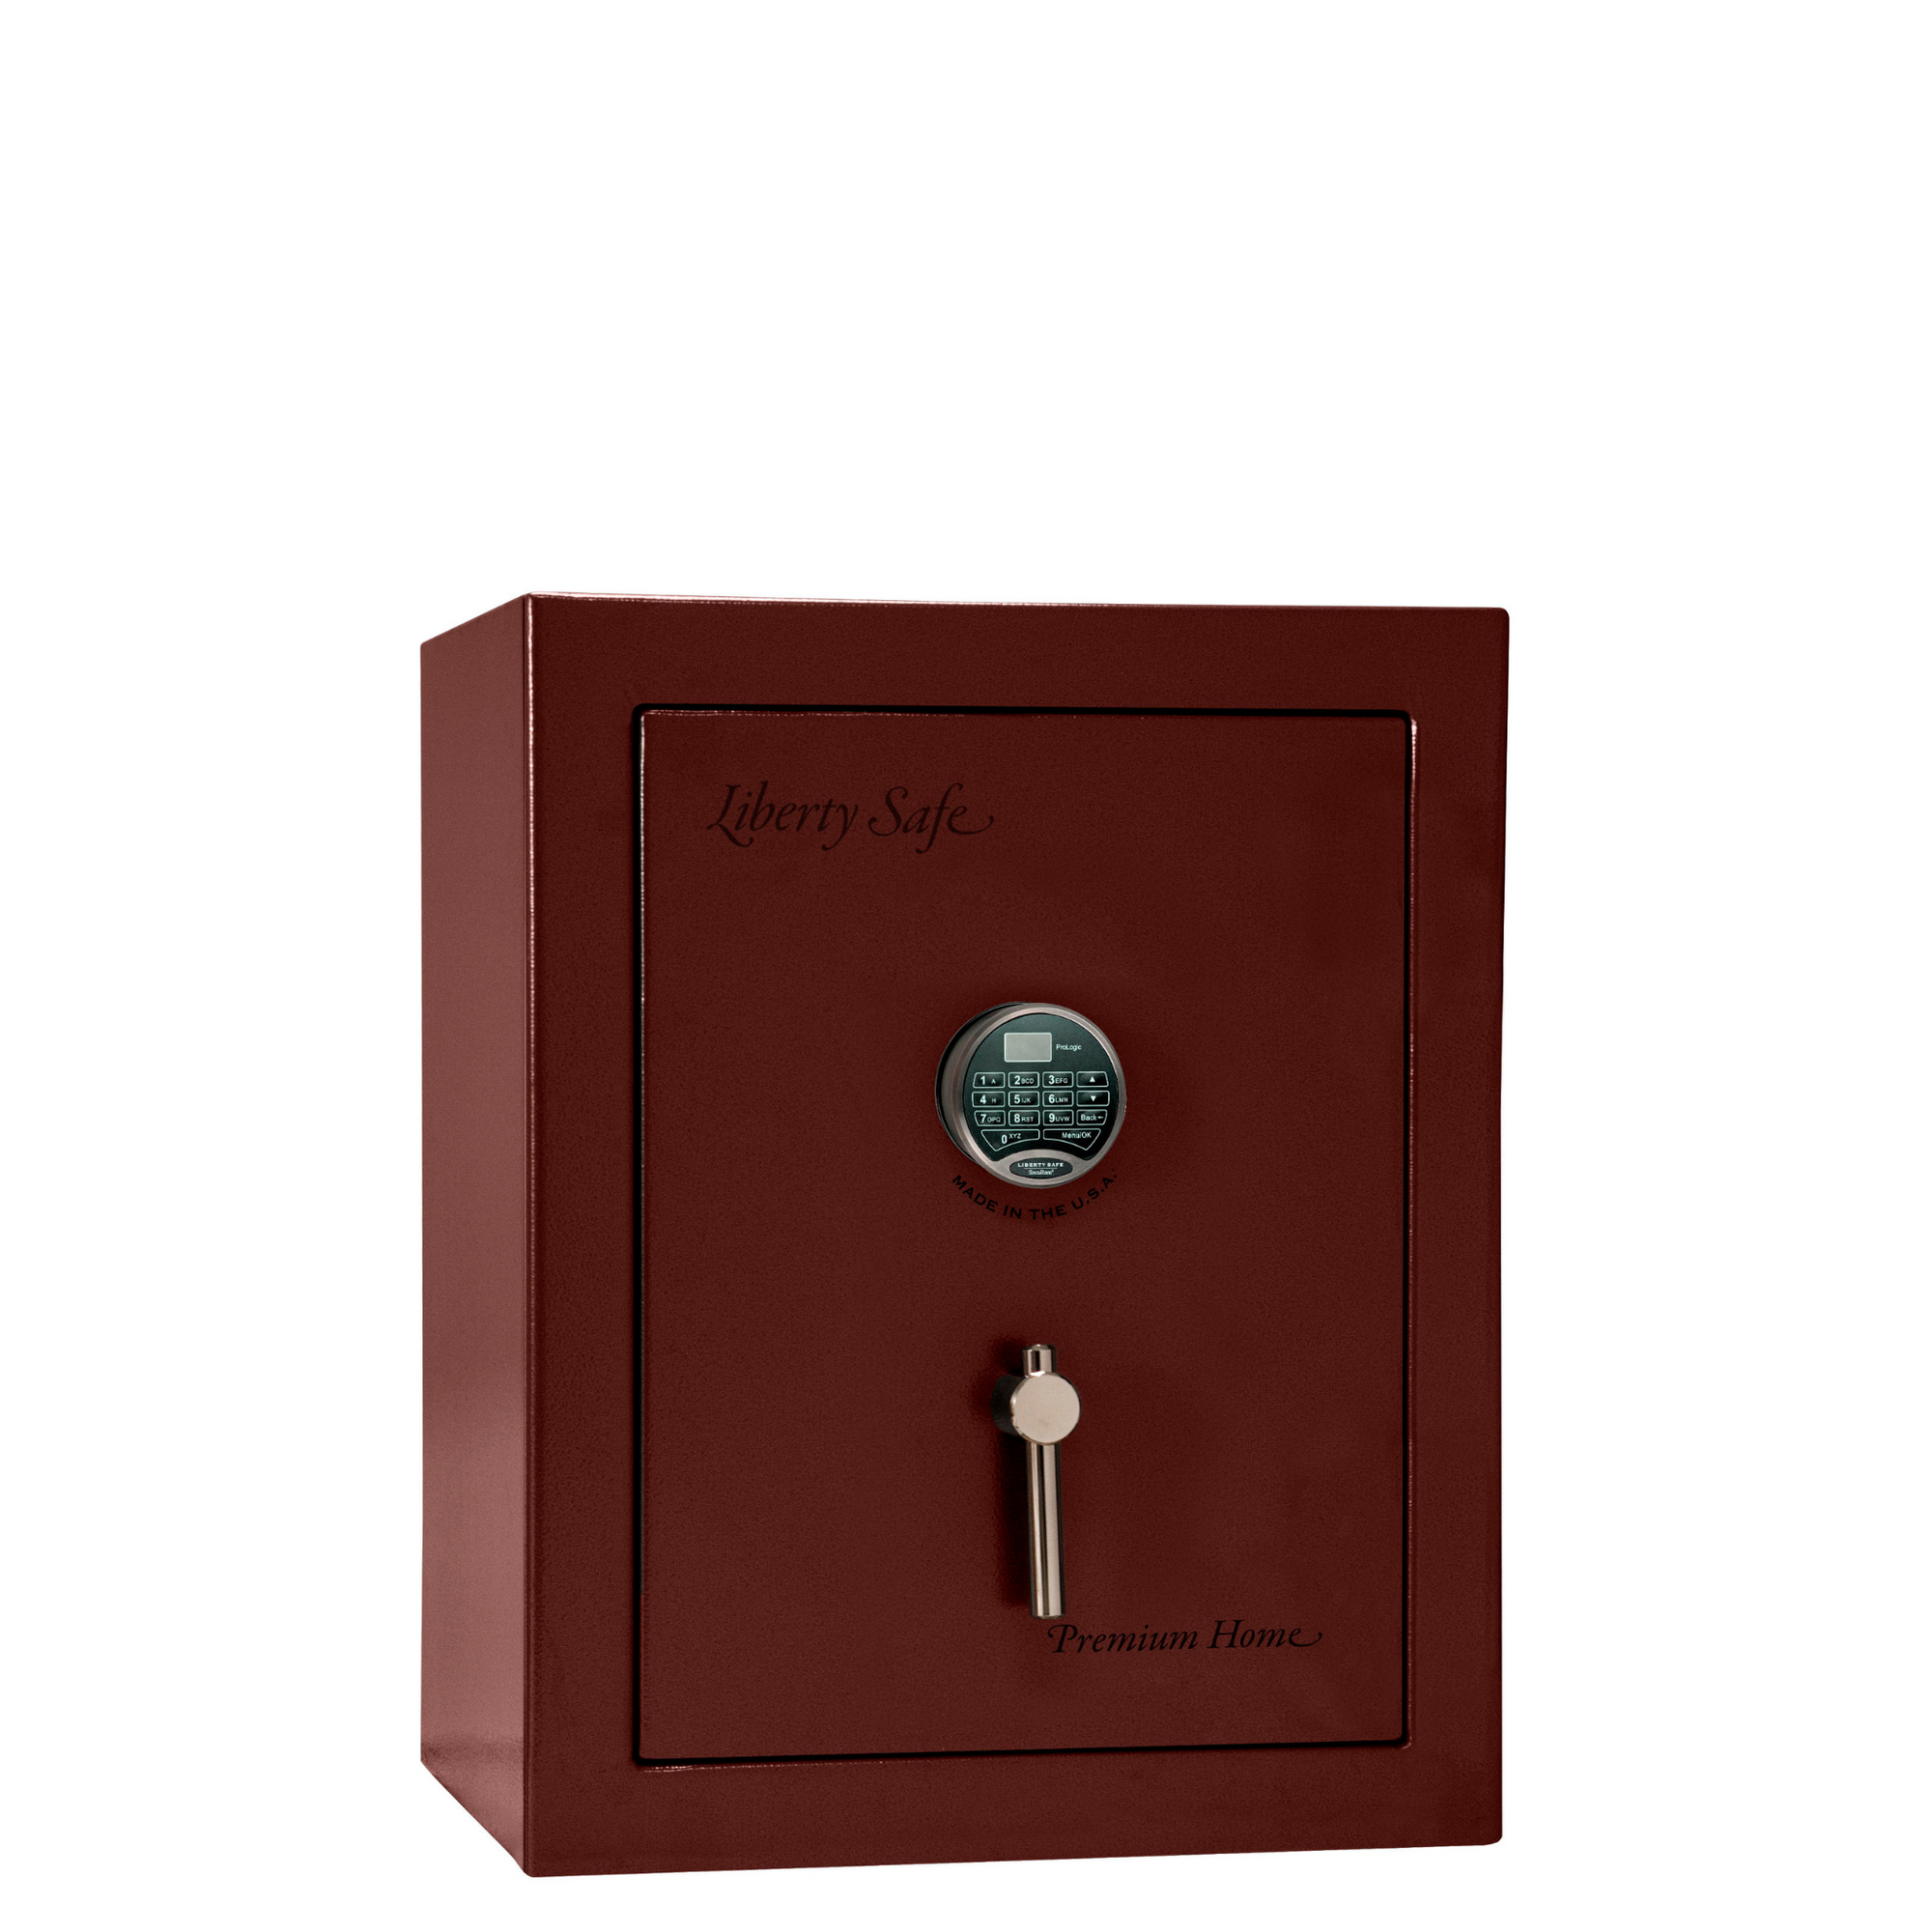 Premium Home Series | Level 7 Security | 2 Hour Fire Protection | 08 | Dimensions: 30"(H) x 24"(W) x 20.25"(D) | Burgundy Marble - Closed Door